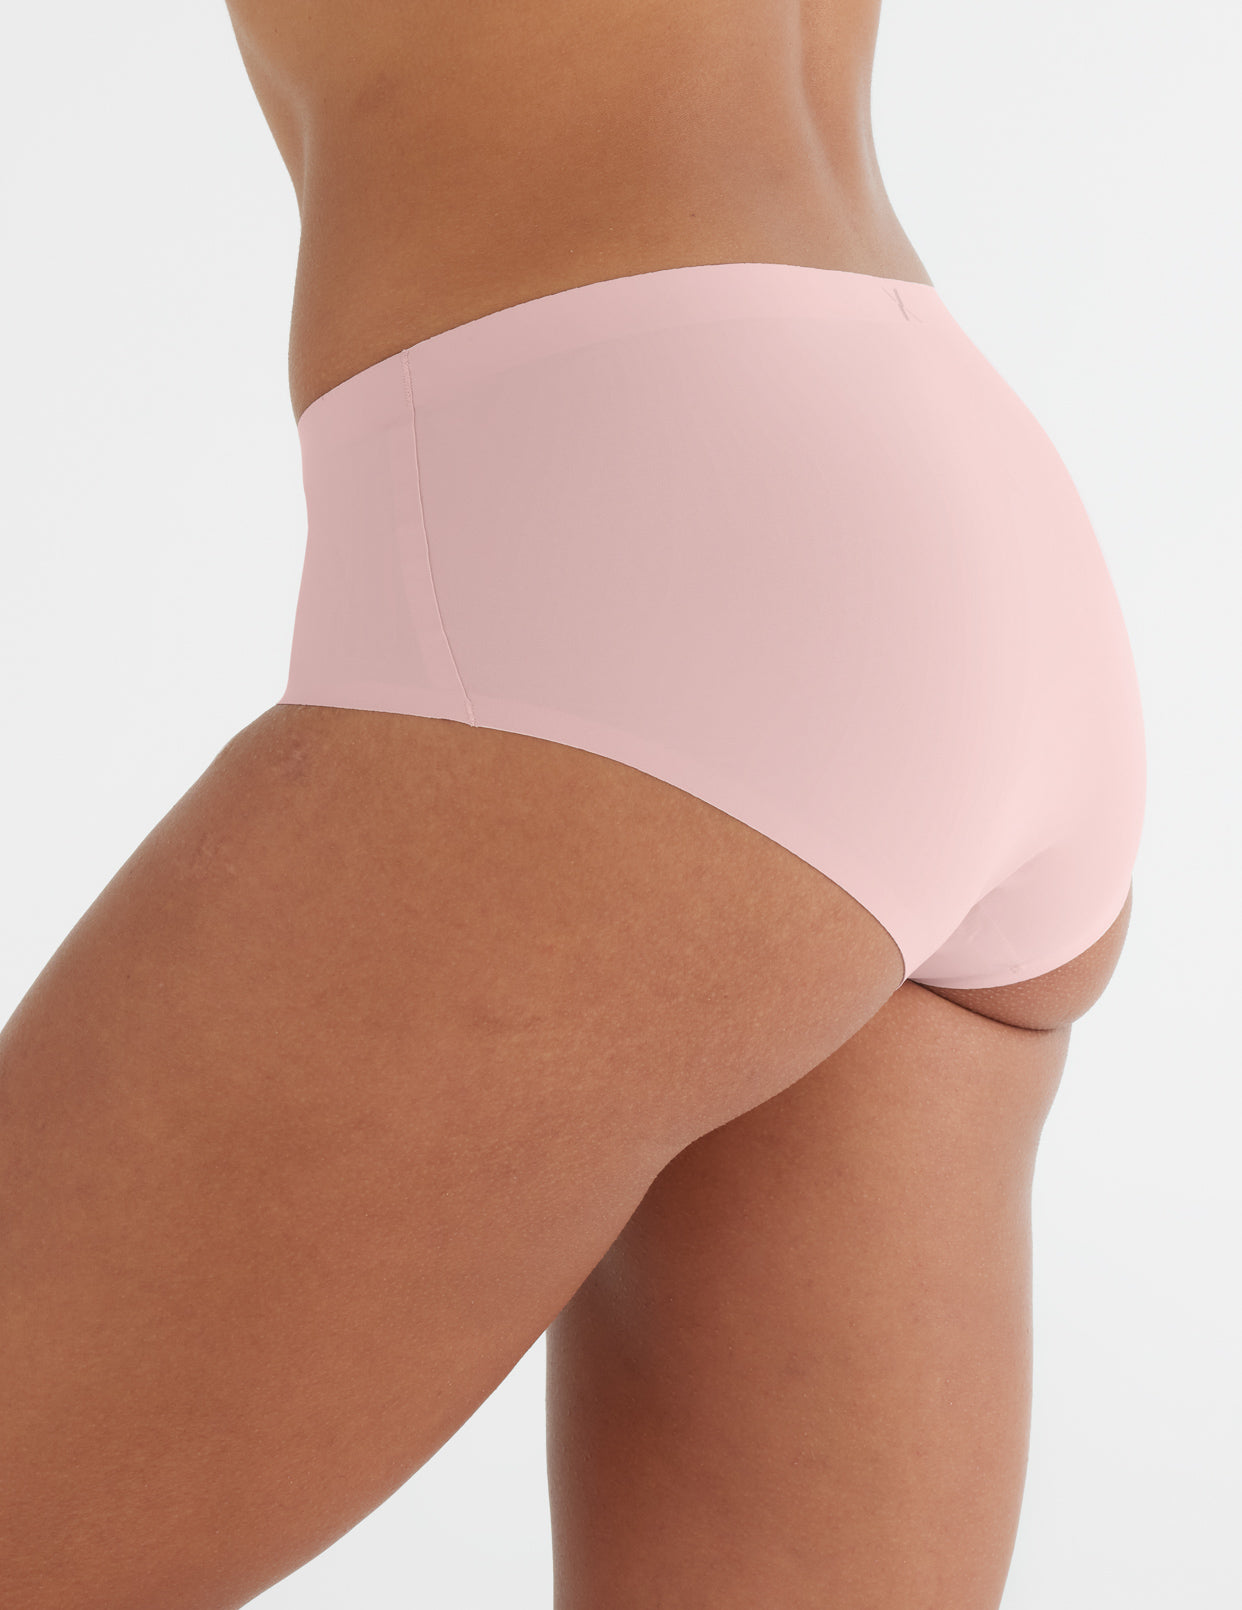 Clip-Knix Standard Pure Cotton Women Underwear, Button Underwear, Patented and Front Fastening Knicker, Cozy and Comfortable